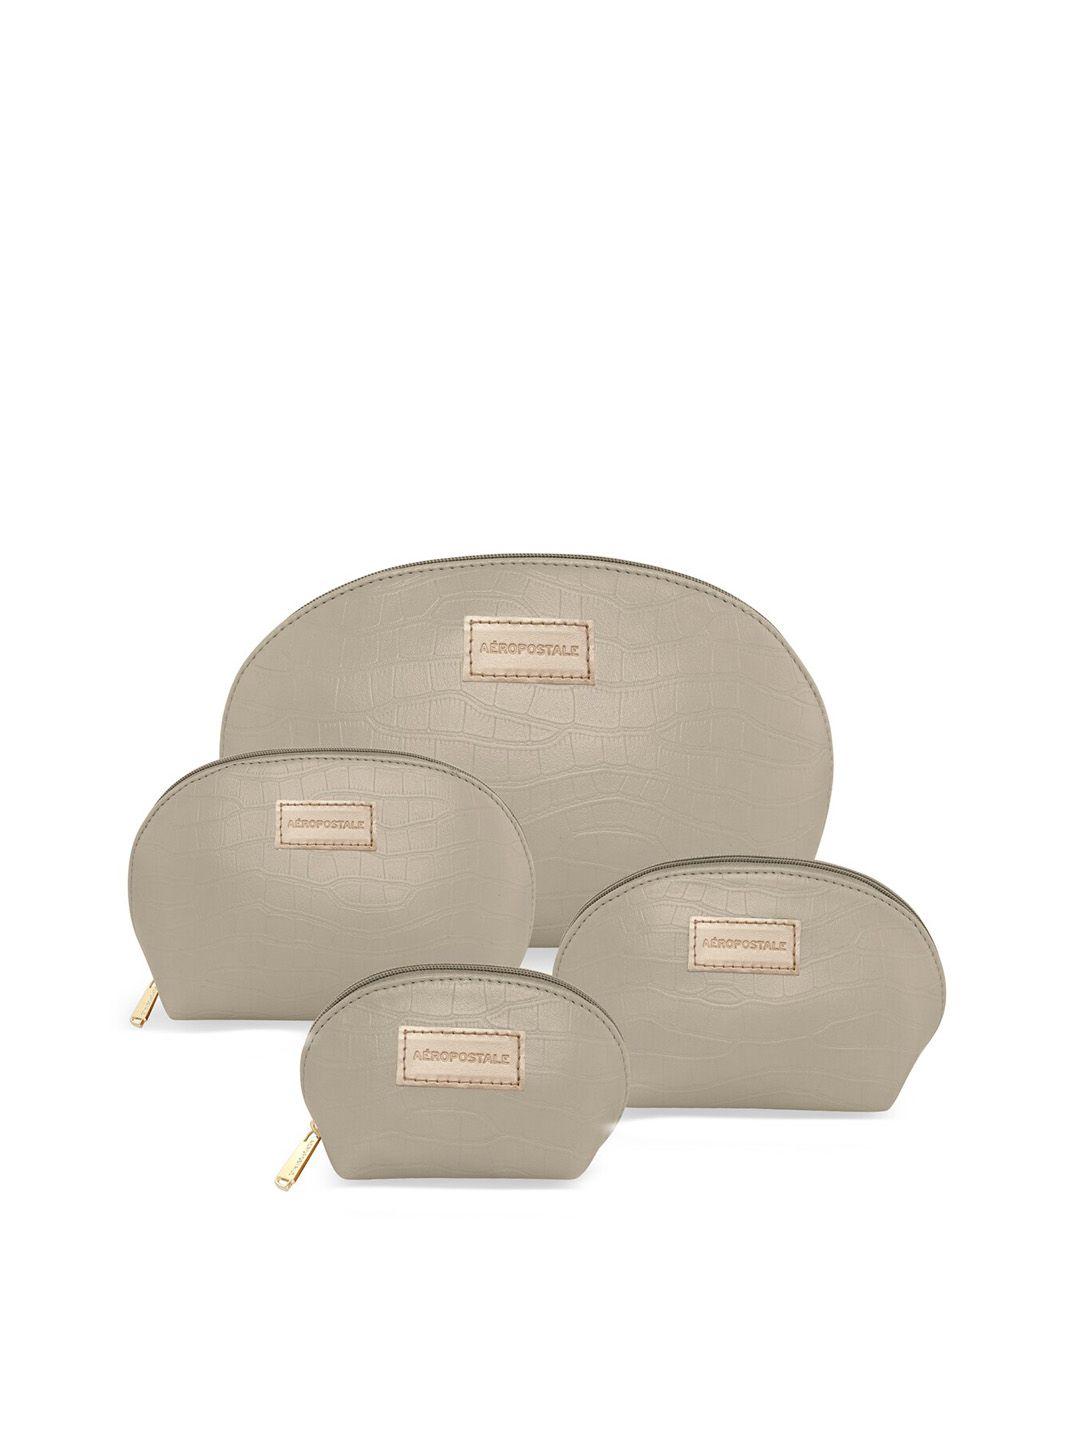 aeropostale cream-coloured pu structured sling bag with bow detail